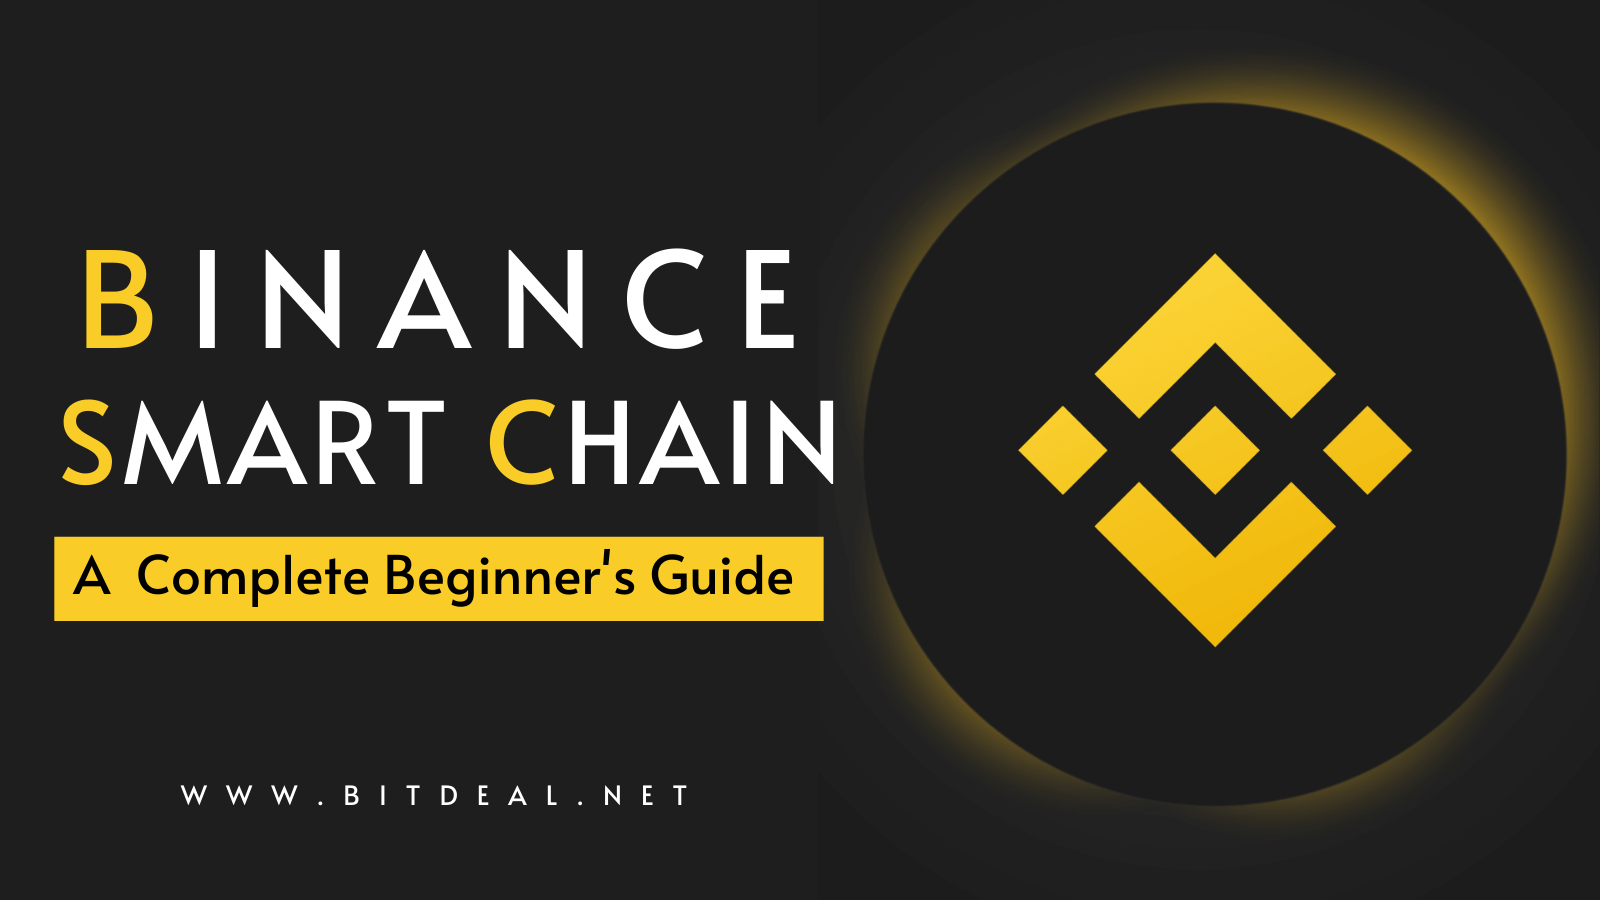 Binance Smart Chain - A Way to Enable Smart Contracts